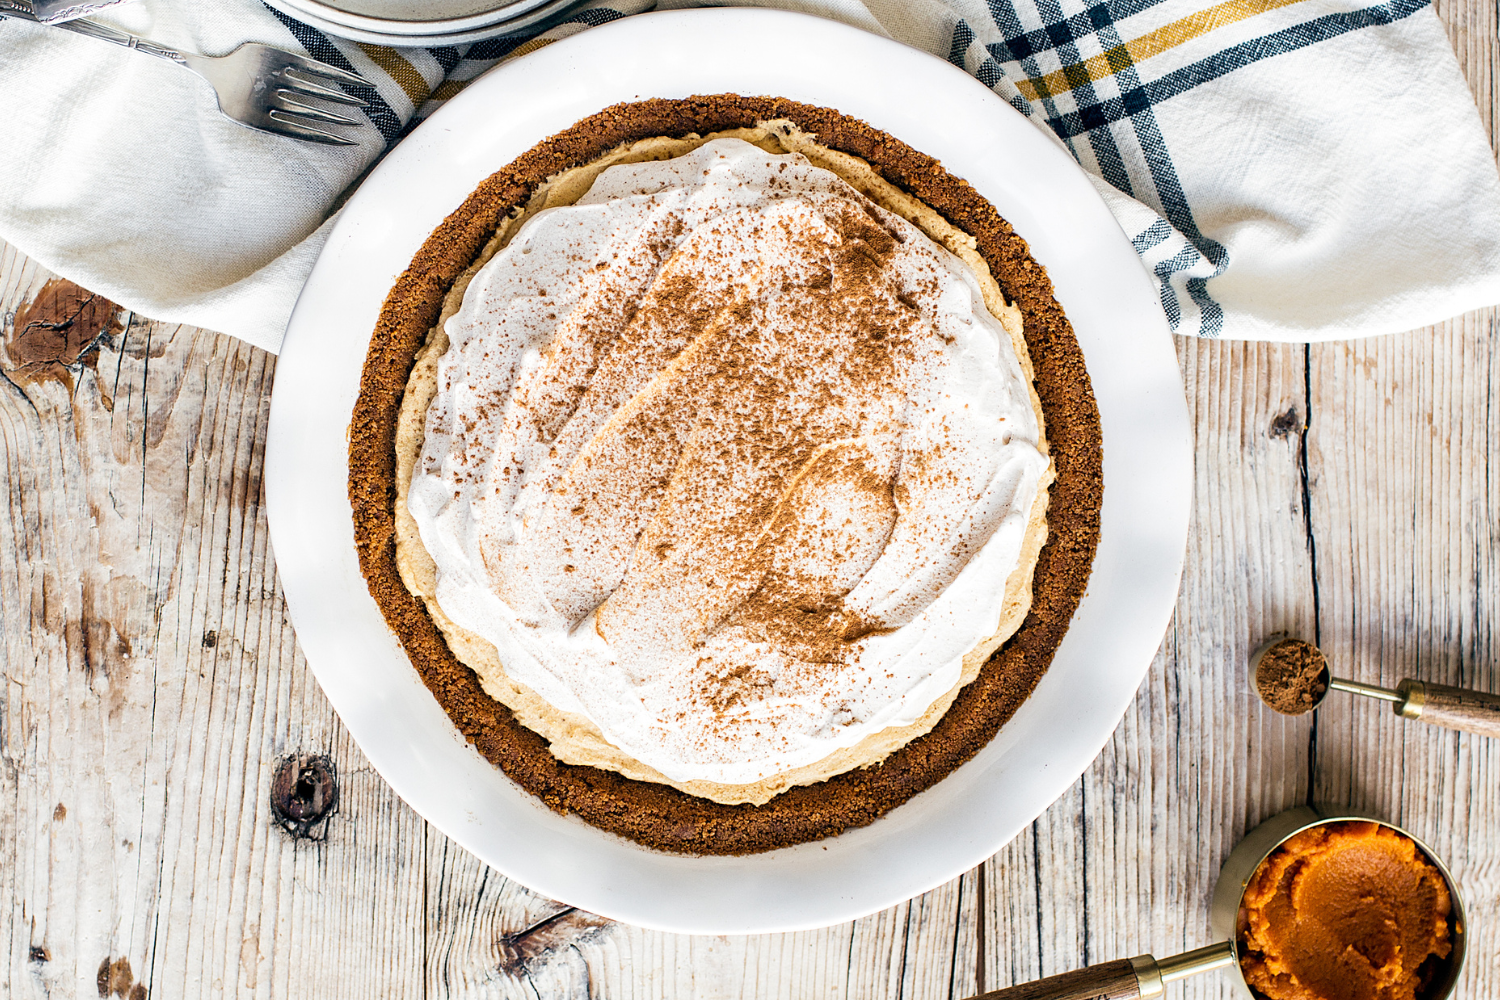 an unsliced No Bake Pumpkin Mousse Pie in its pie pan, ready to slice up and serve.